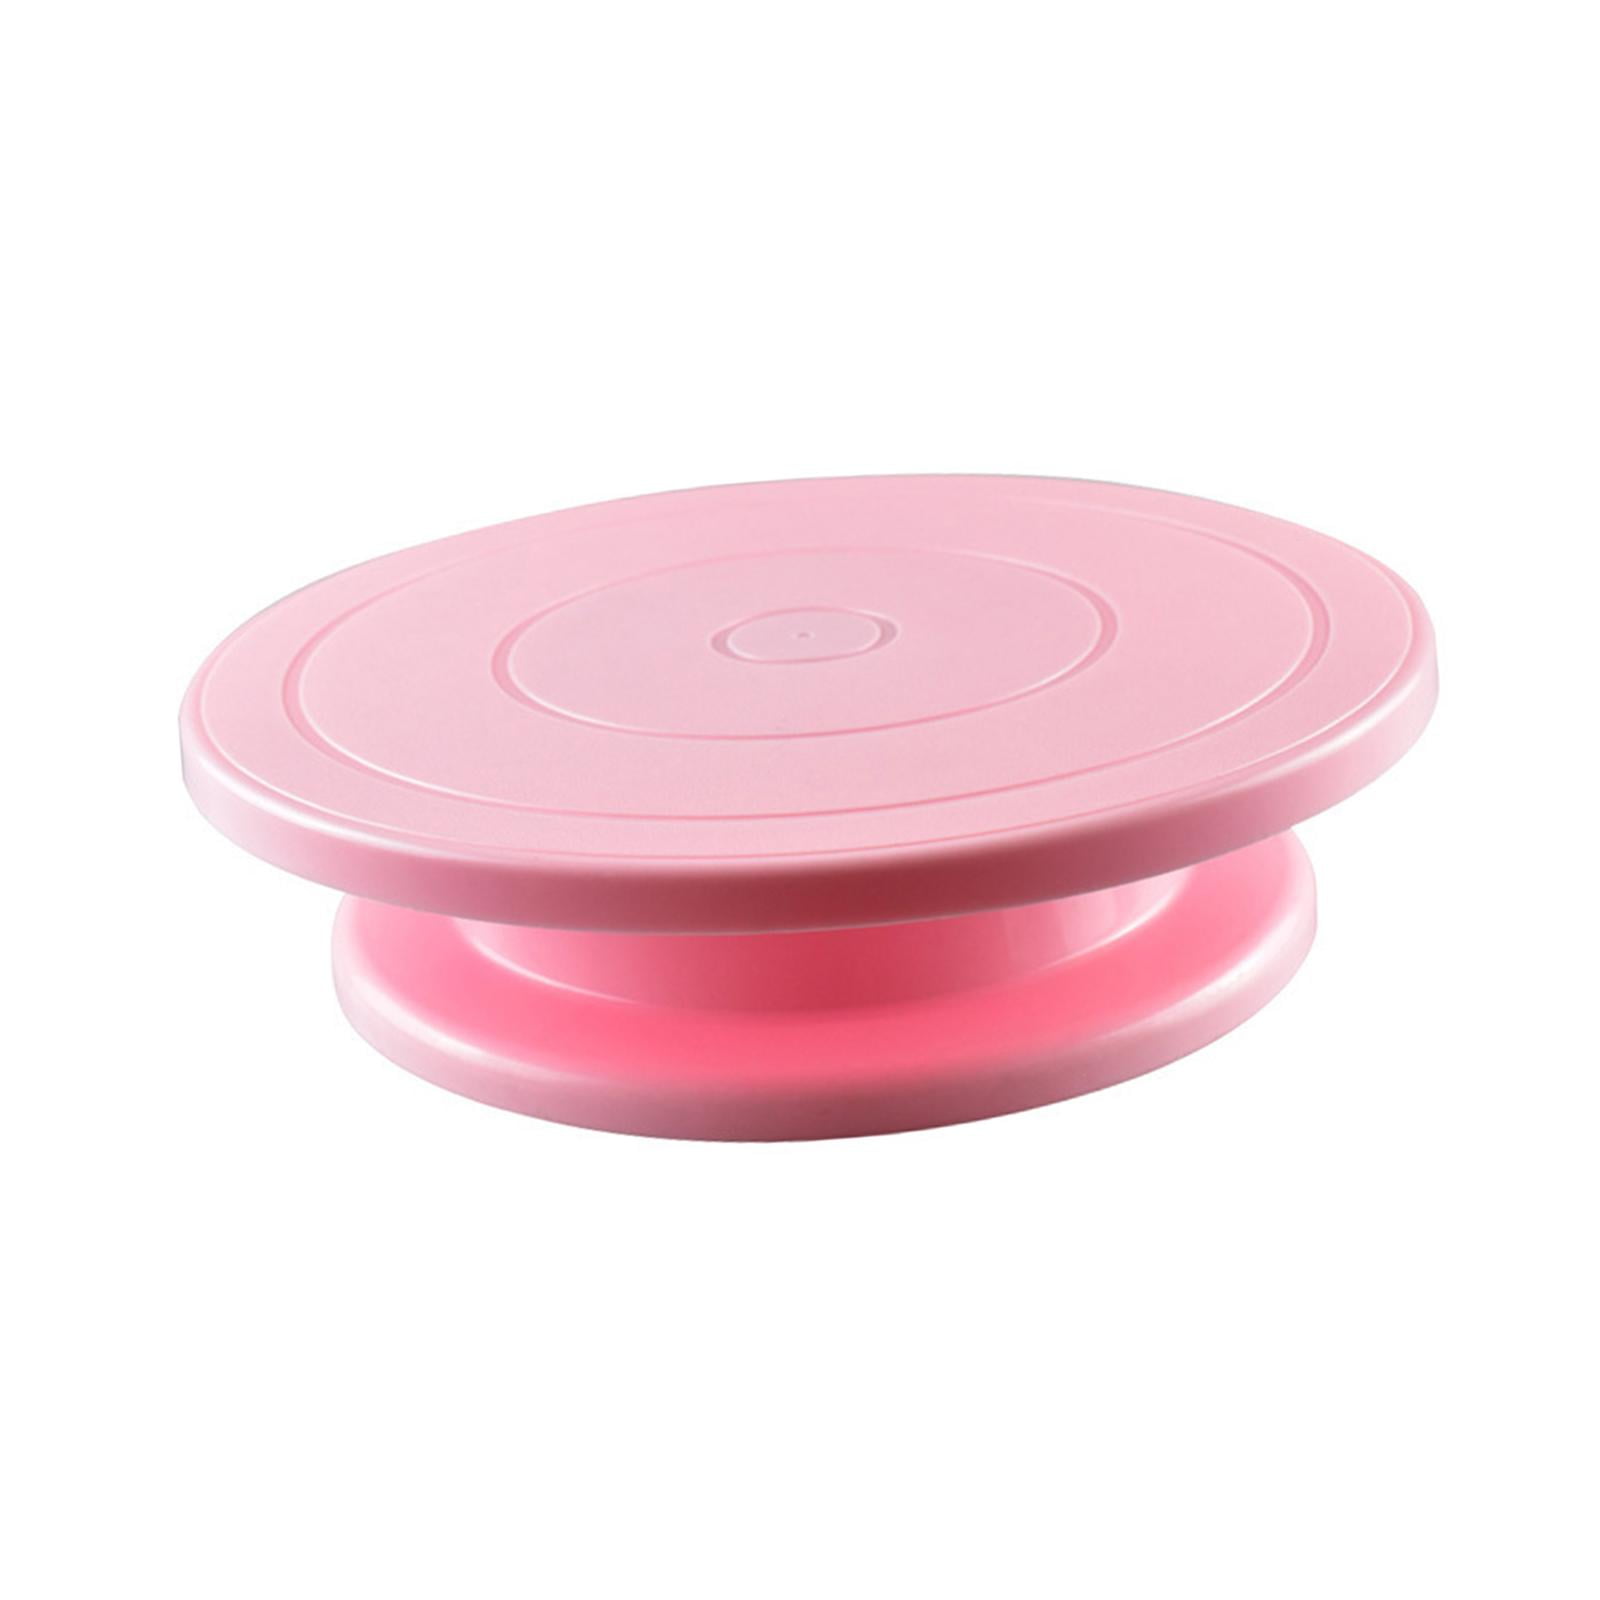 Pink Cookie Decorating Turntable, Rotating Cake Turntable Stand Baking  Decor Plate